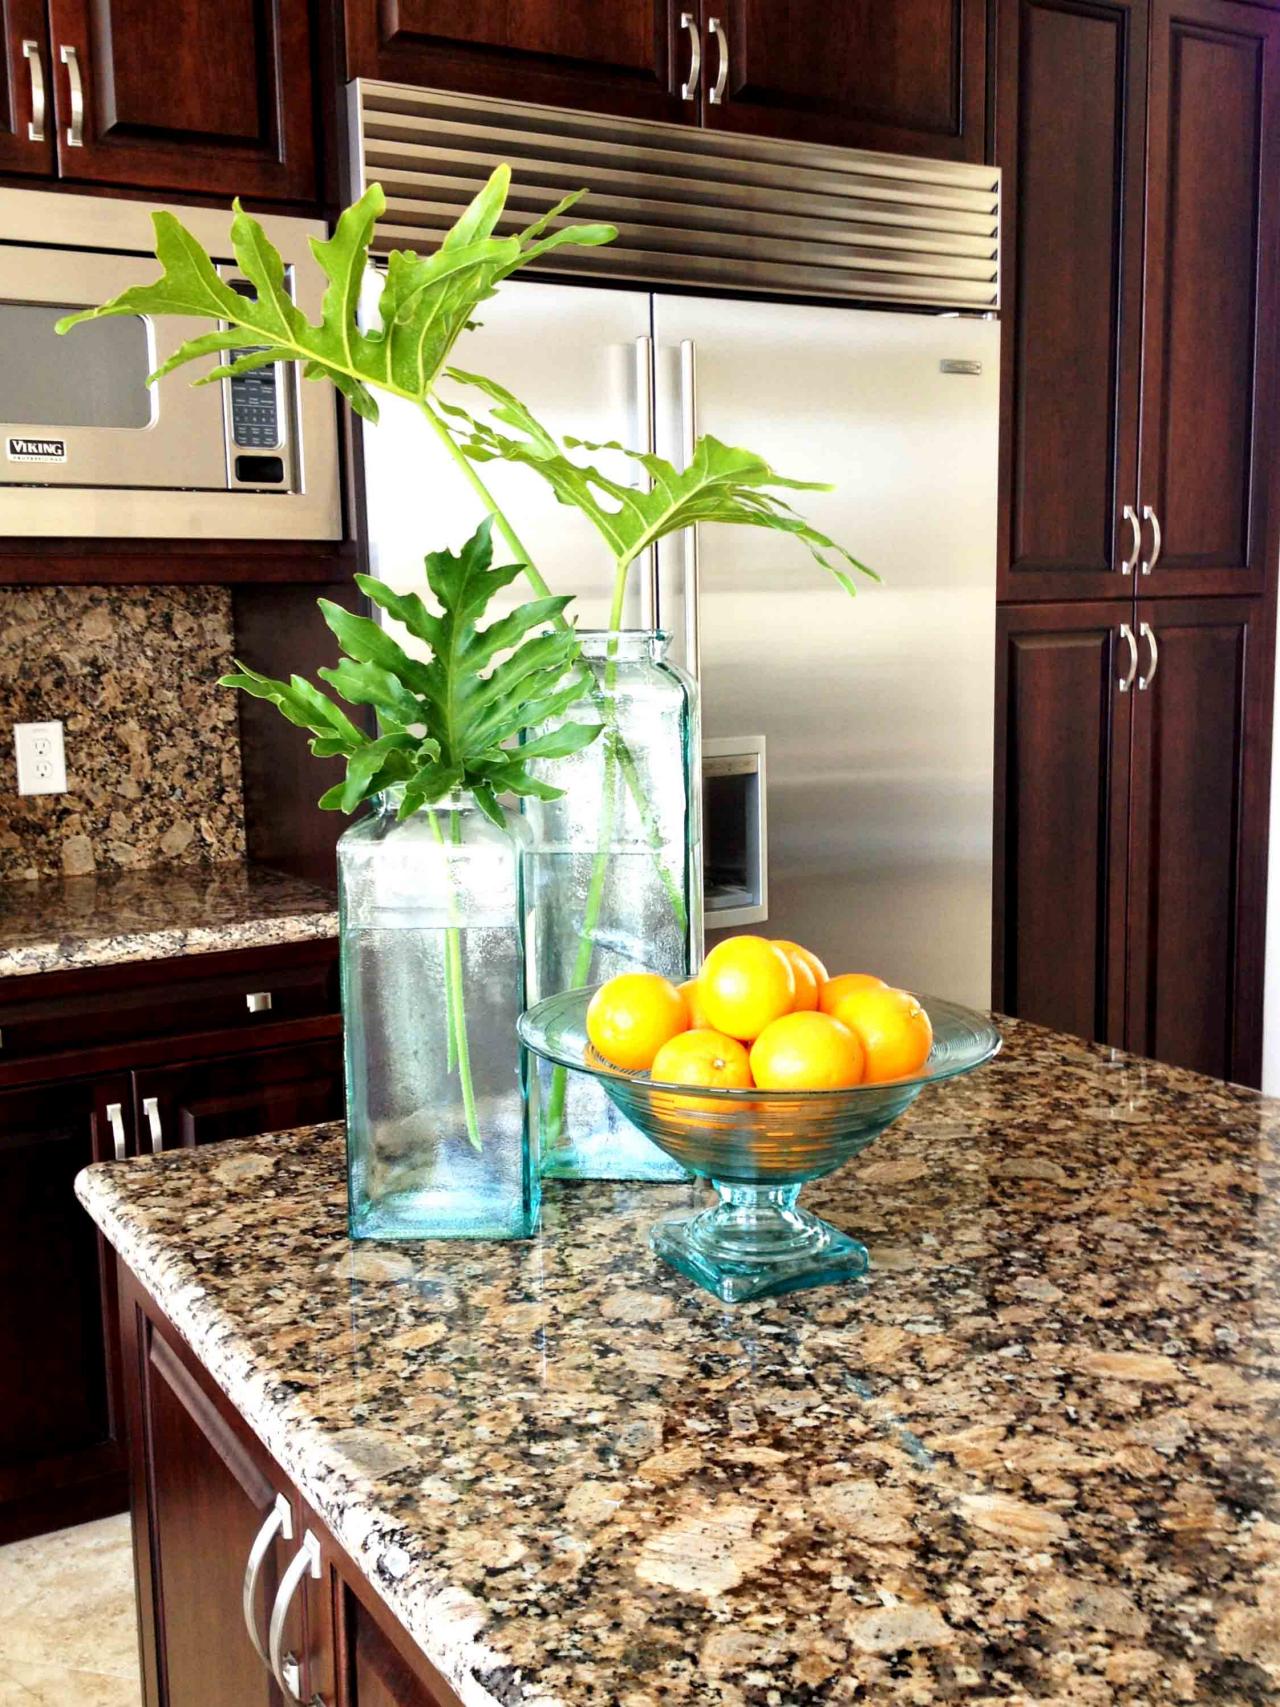 Designer Favorite Kitchen Countertop Accessories - and Items to Avoid!